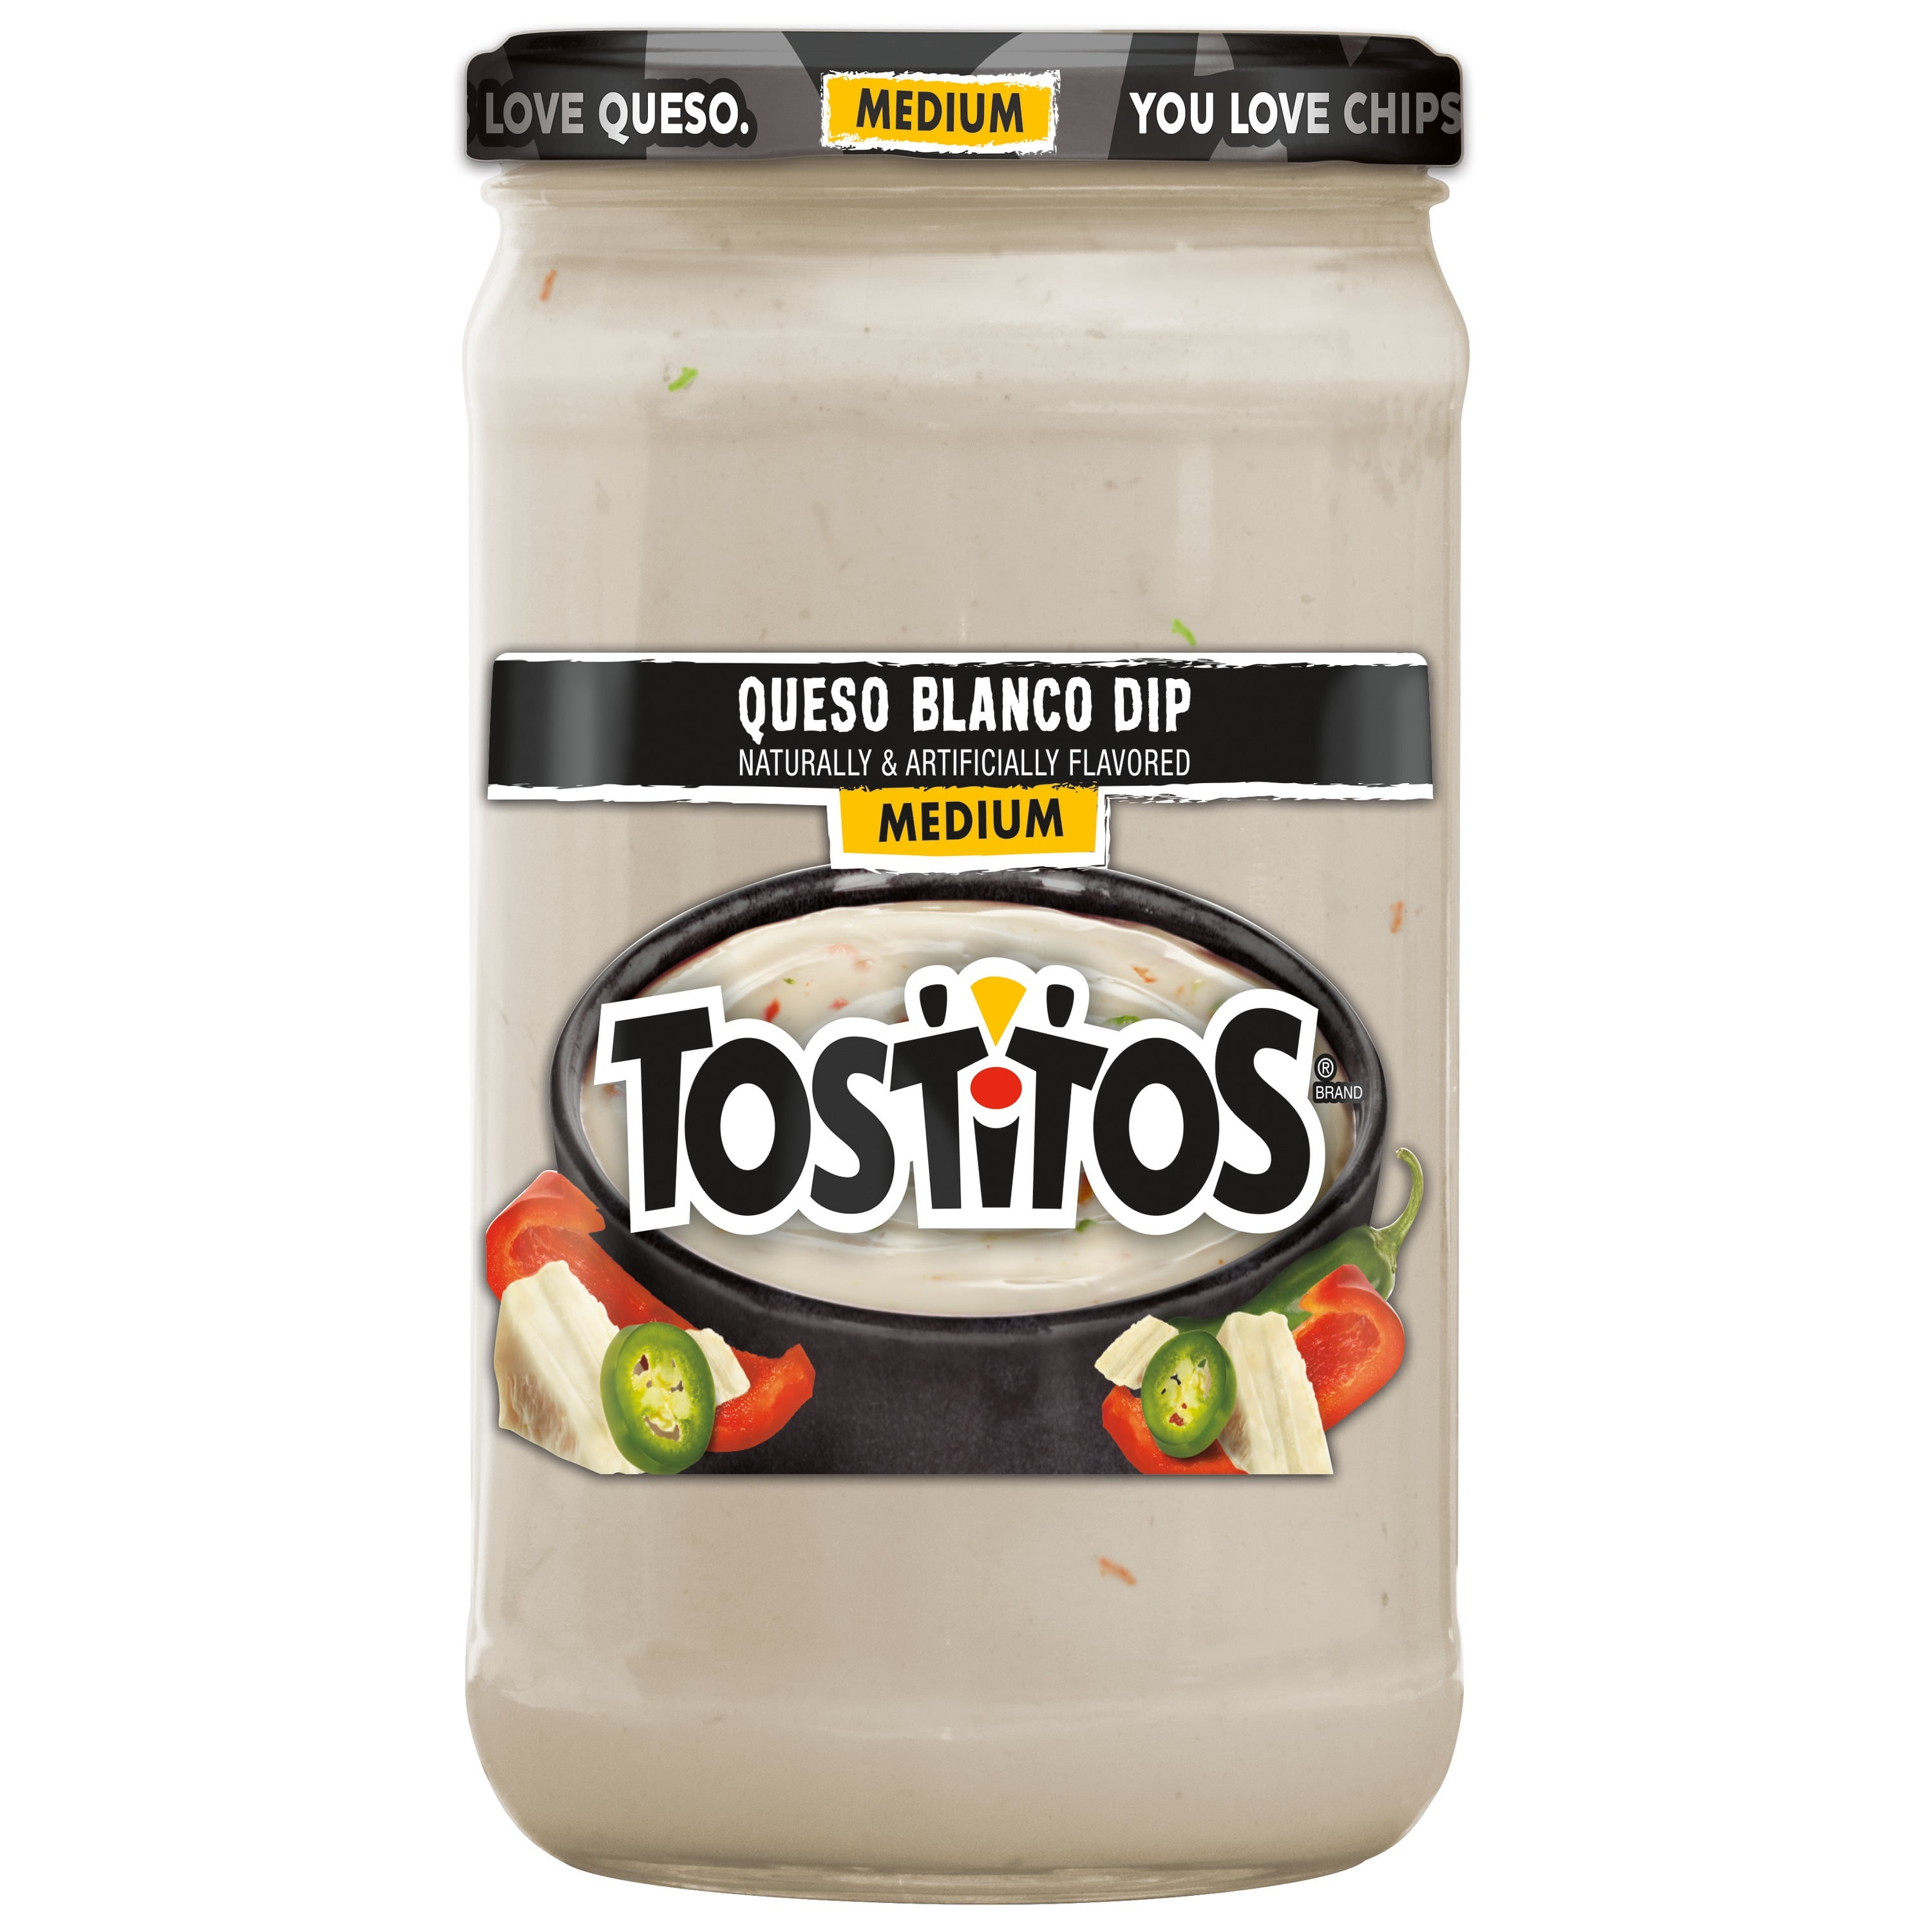 Does Tostitos Queso Need To Be Refrigerated